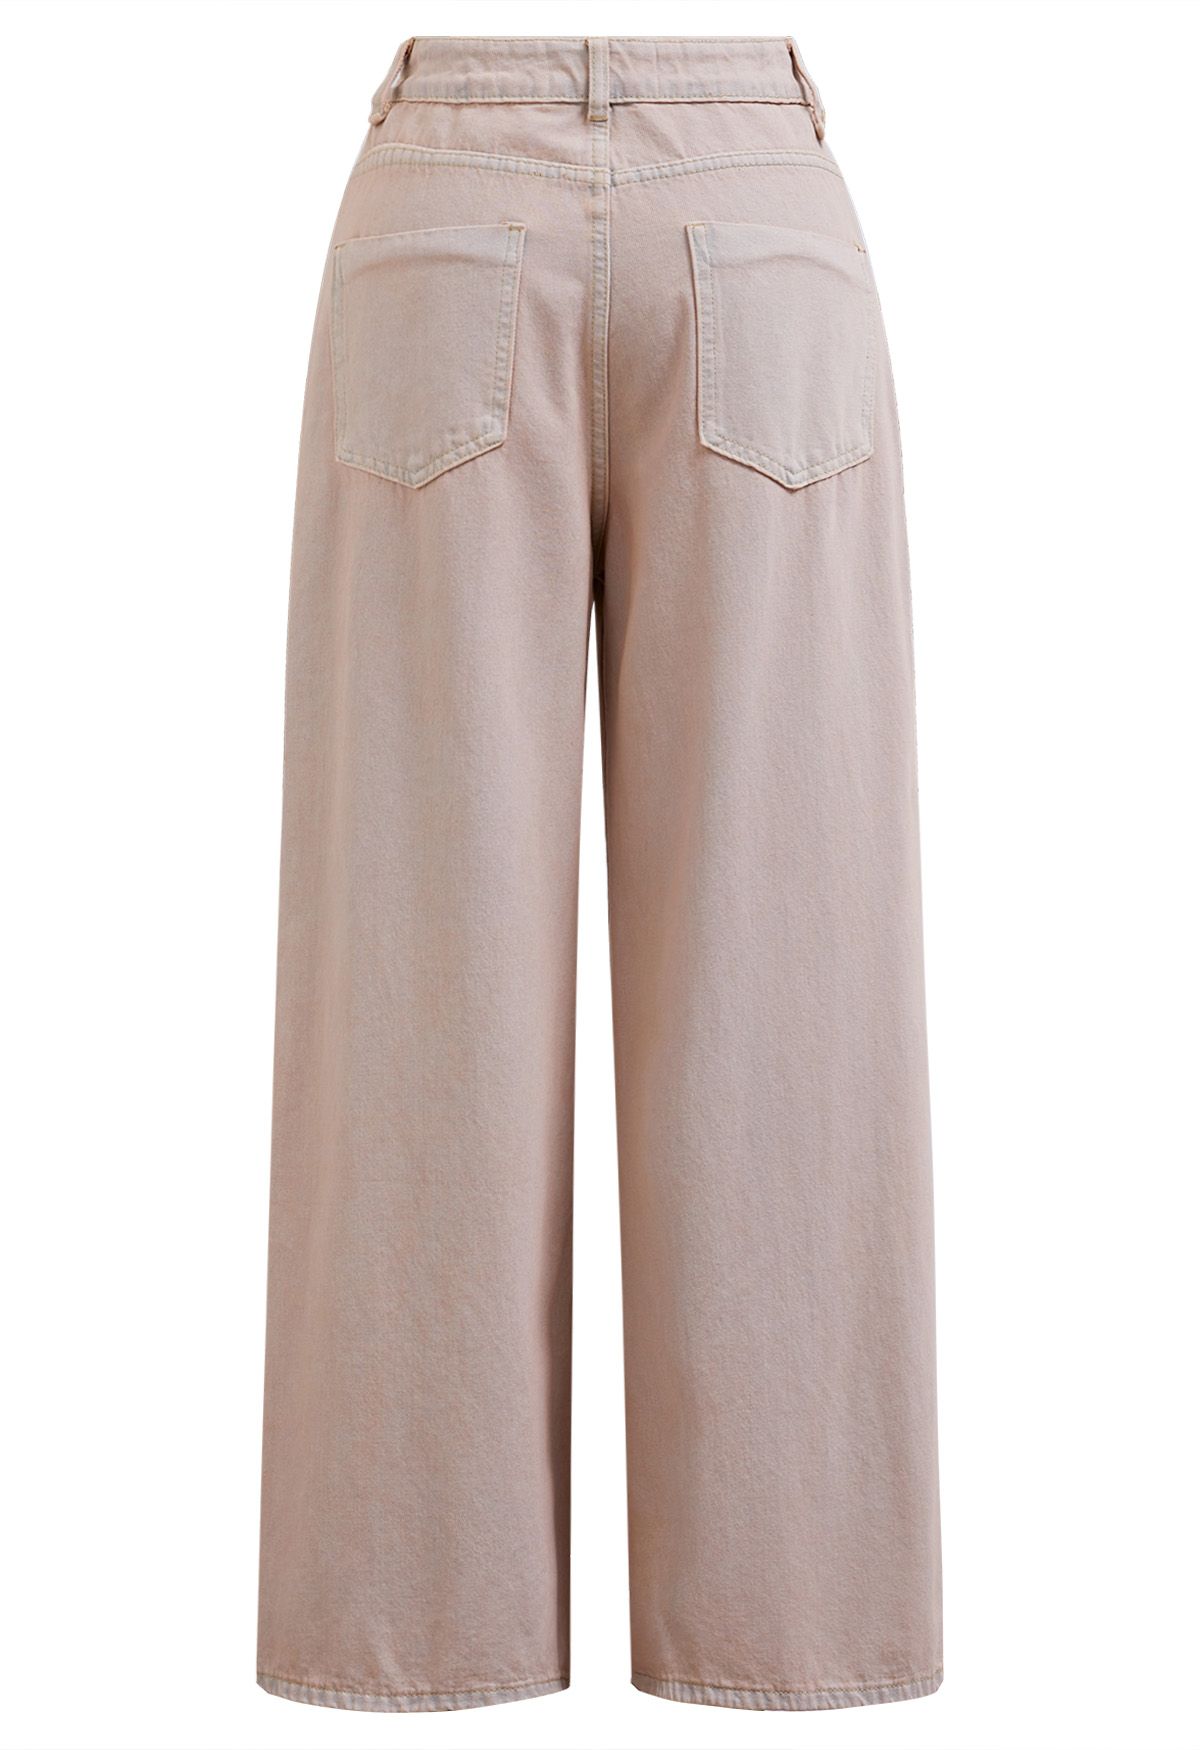 Pearl Adorned Straight-Leg Jeans in Pink - Retro, Indie and Unique Fashion